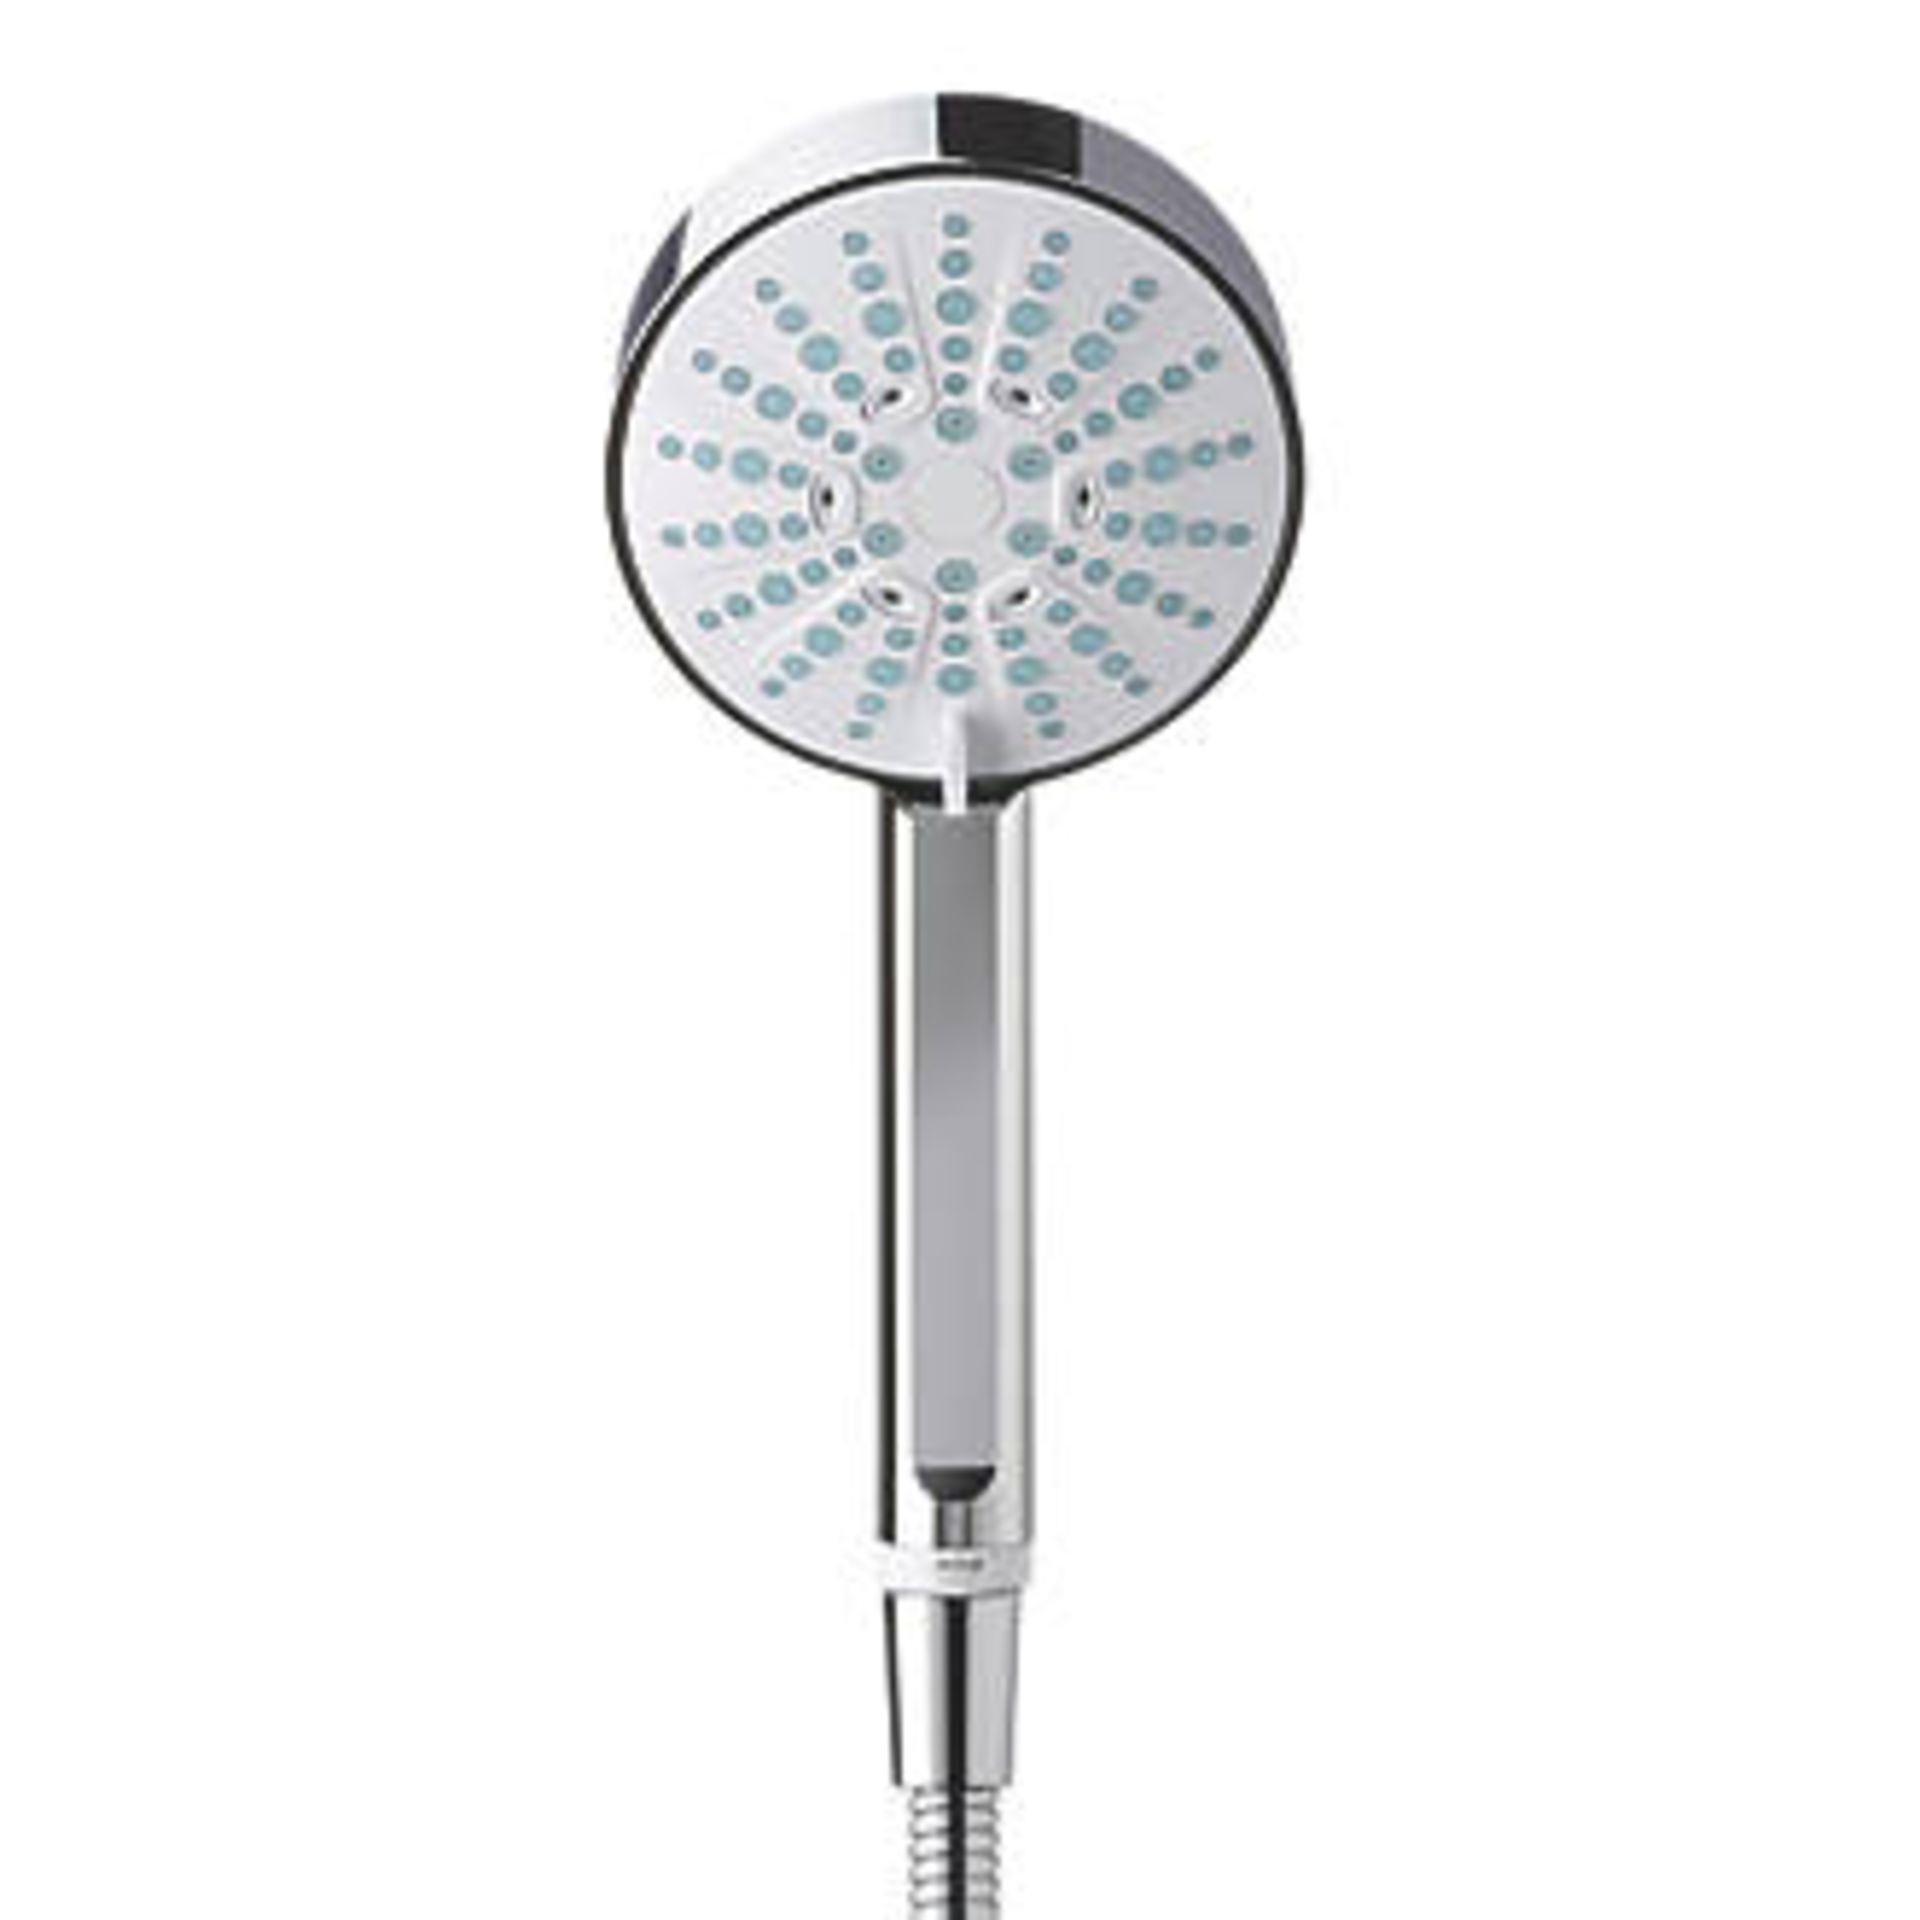 (XL63) Mira Atom EV Rear-Fed Exposed Chrome Thermostatic Mixer Shower. Contemporary thermostat... - Image 2 of 3